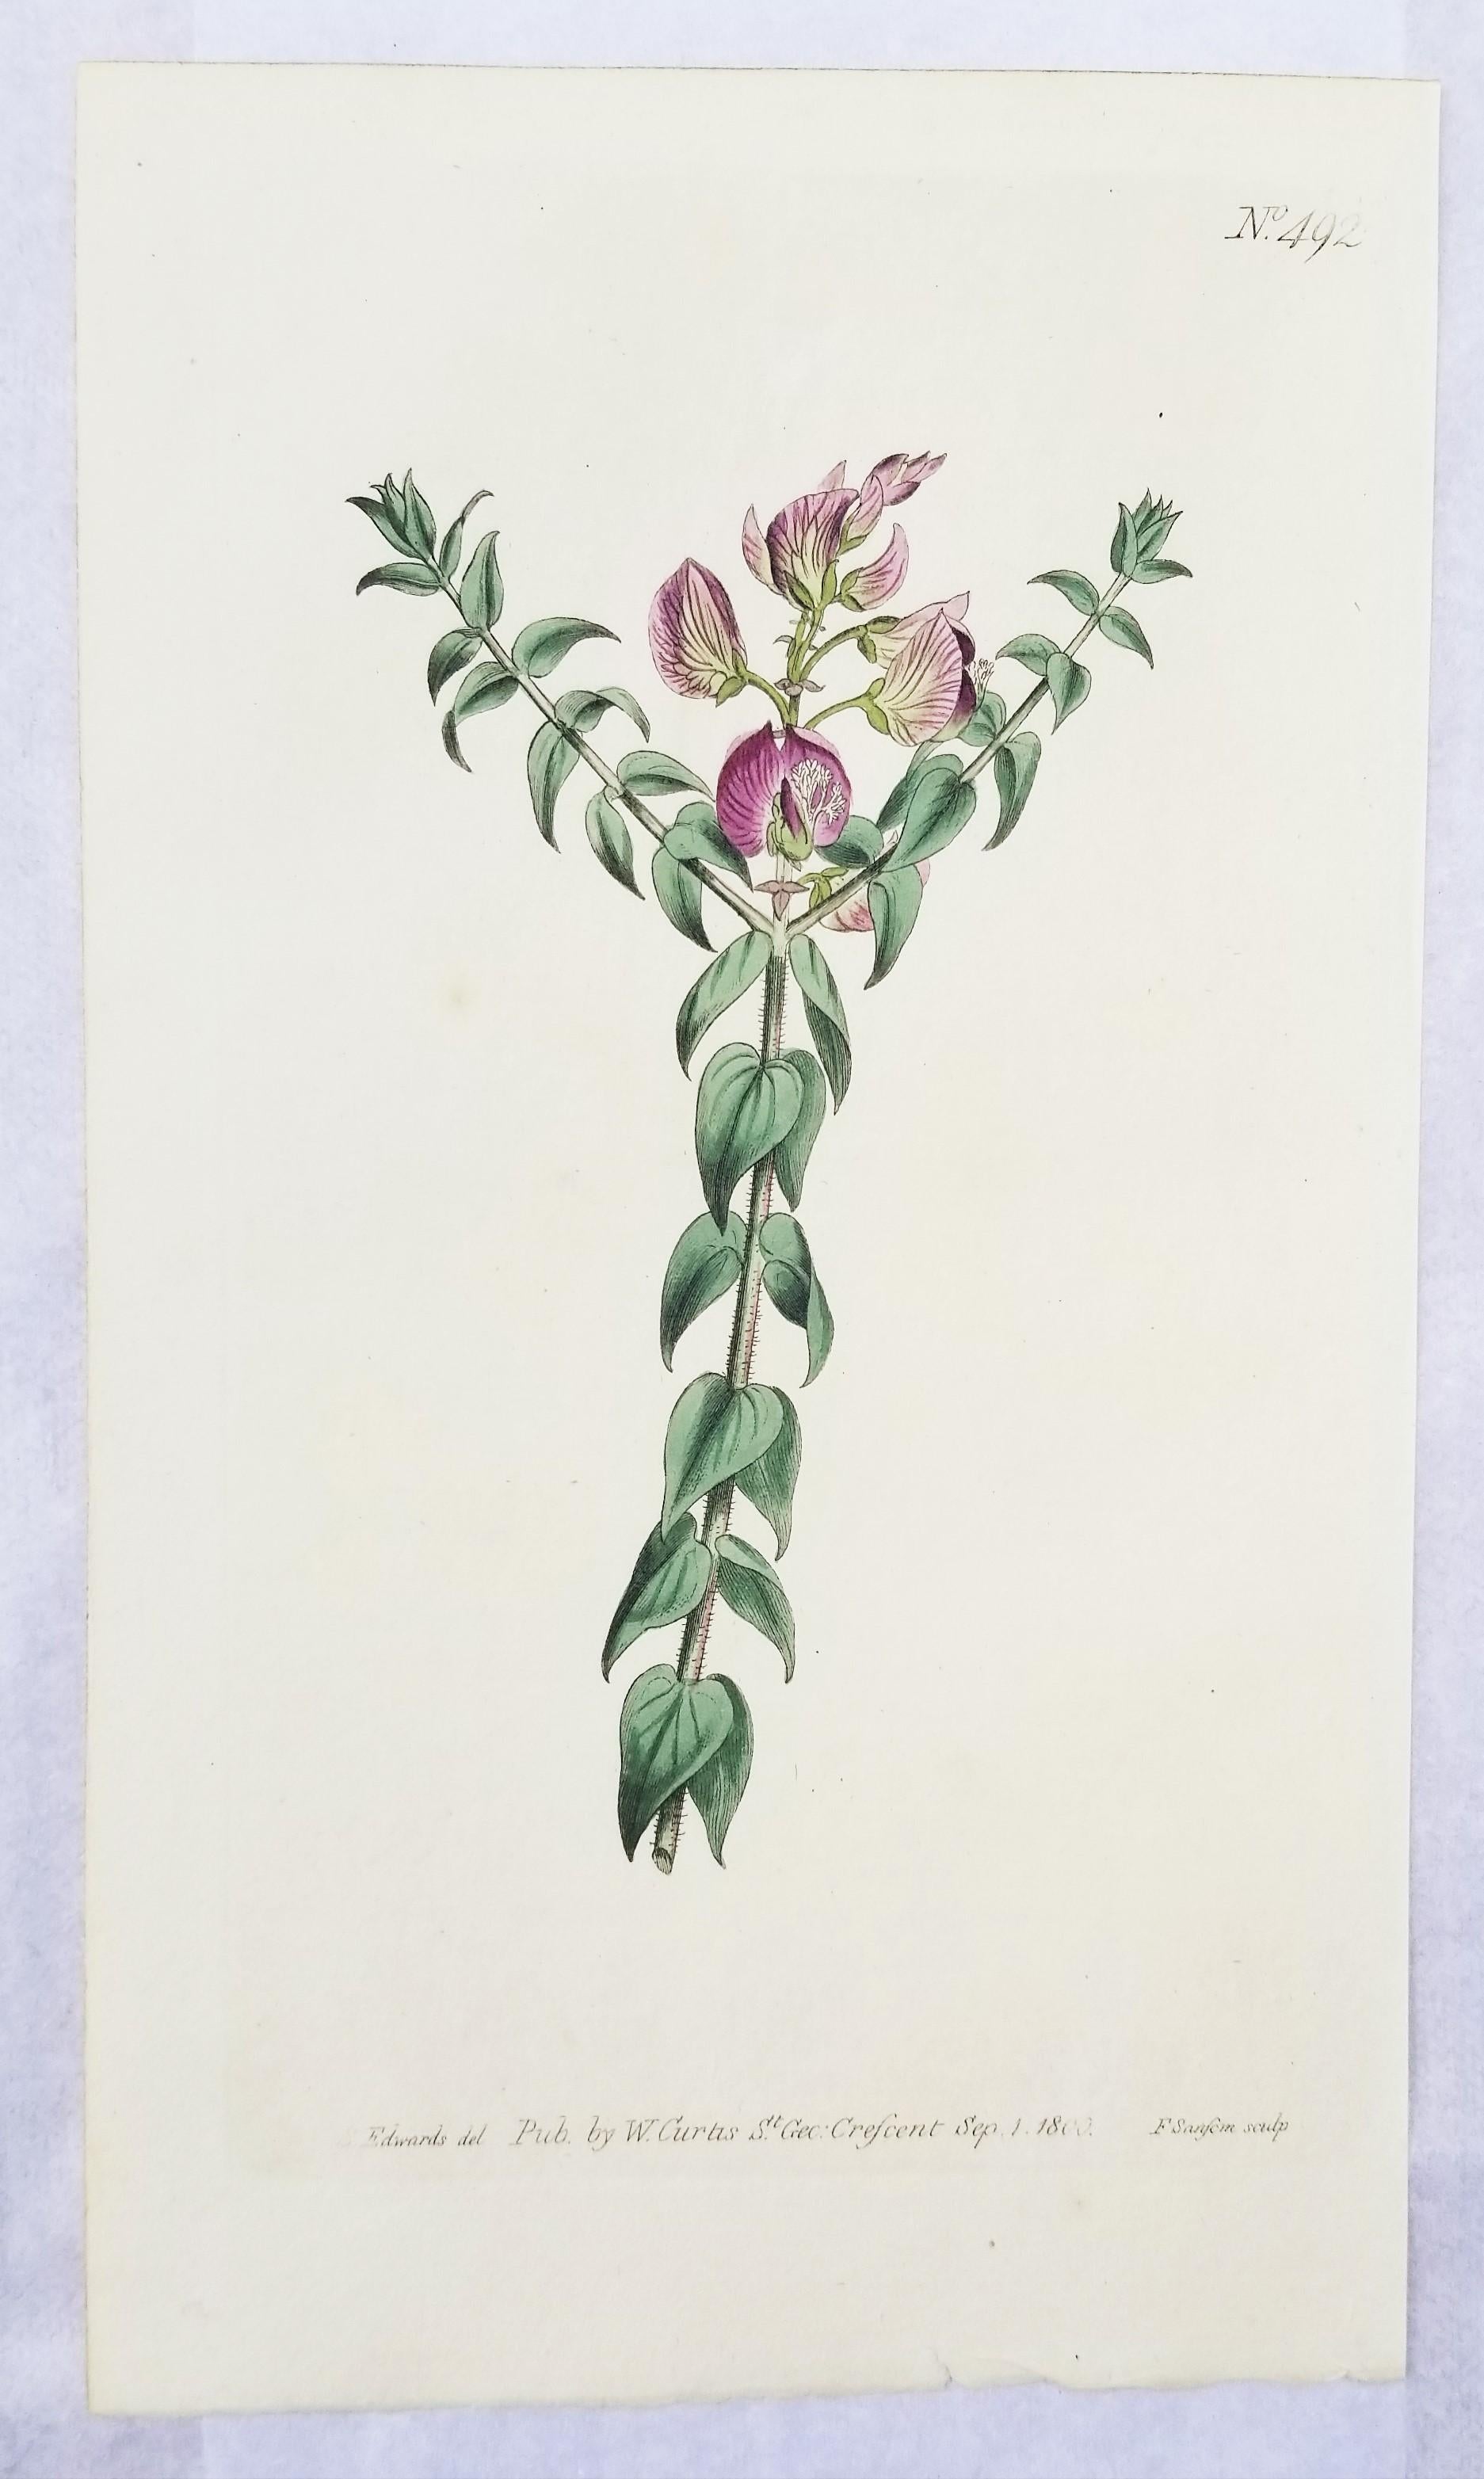 Artist: William Curtis (English, 1746-1799)
Title: Set of Six Hand-Colored Engravings
Portfolio: The Botanical Magazine
Year: 1796-1829
Medium: Set of Six Original Hand-Colored Engravings on wove watermarked paper
Limited edition: approx.